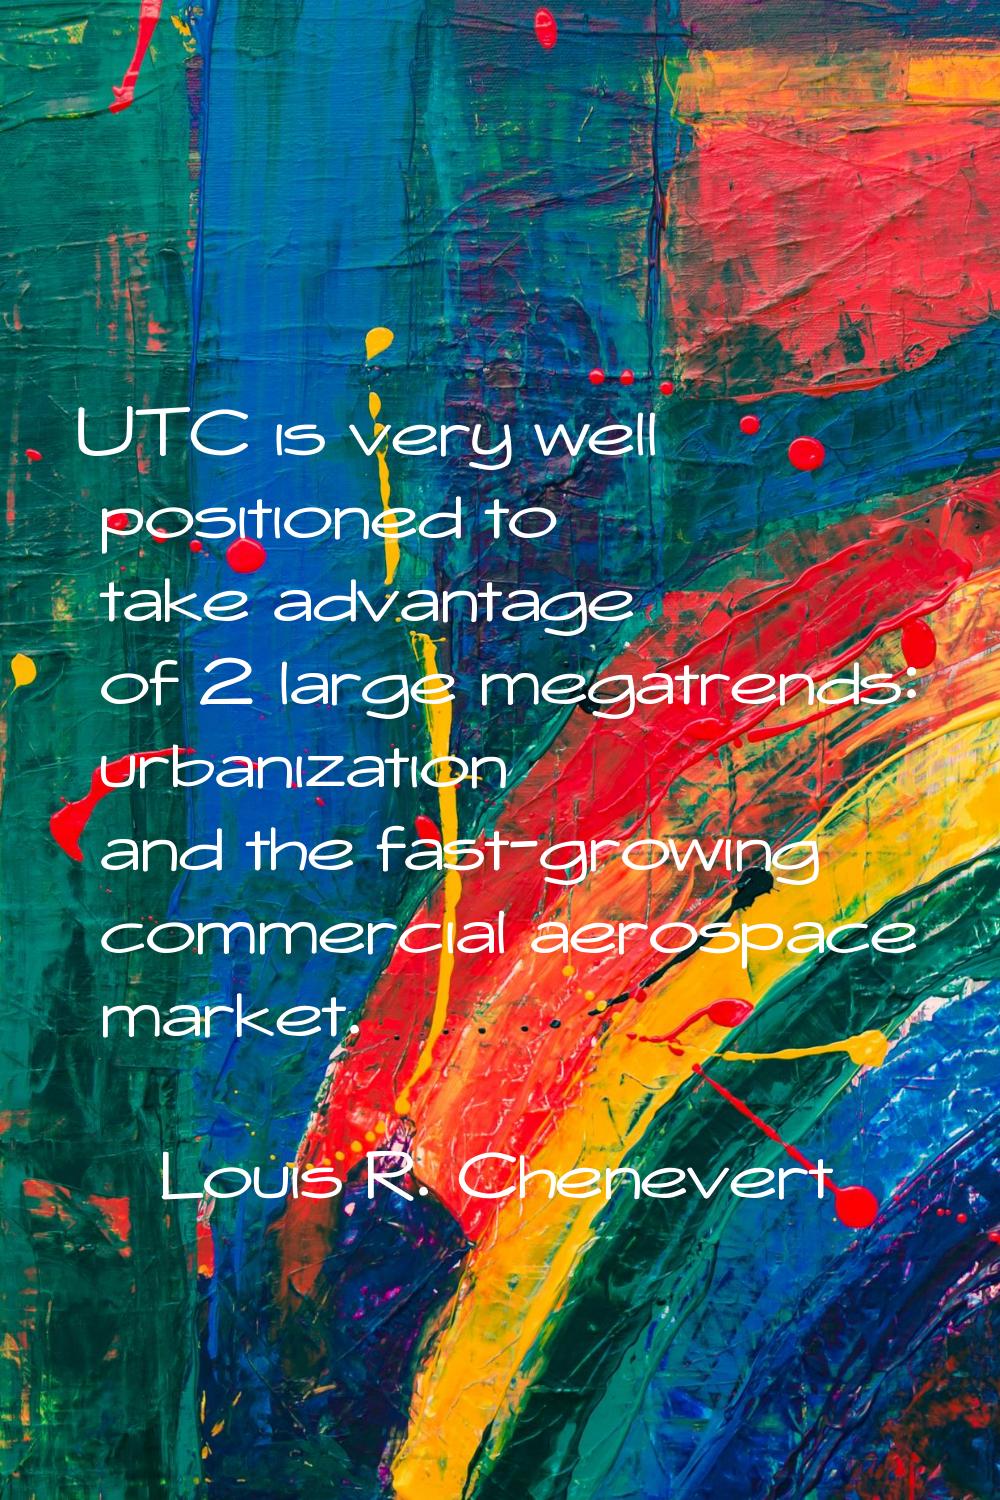 UTC is very well positioned to take advantage of 2 large megatrends: urbanization and the fast-grow